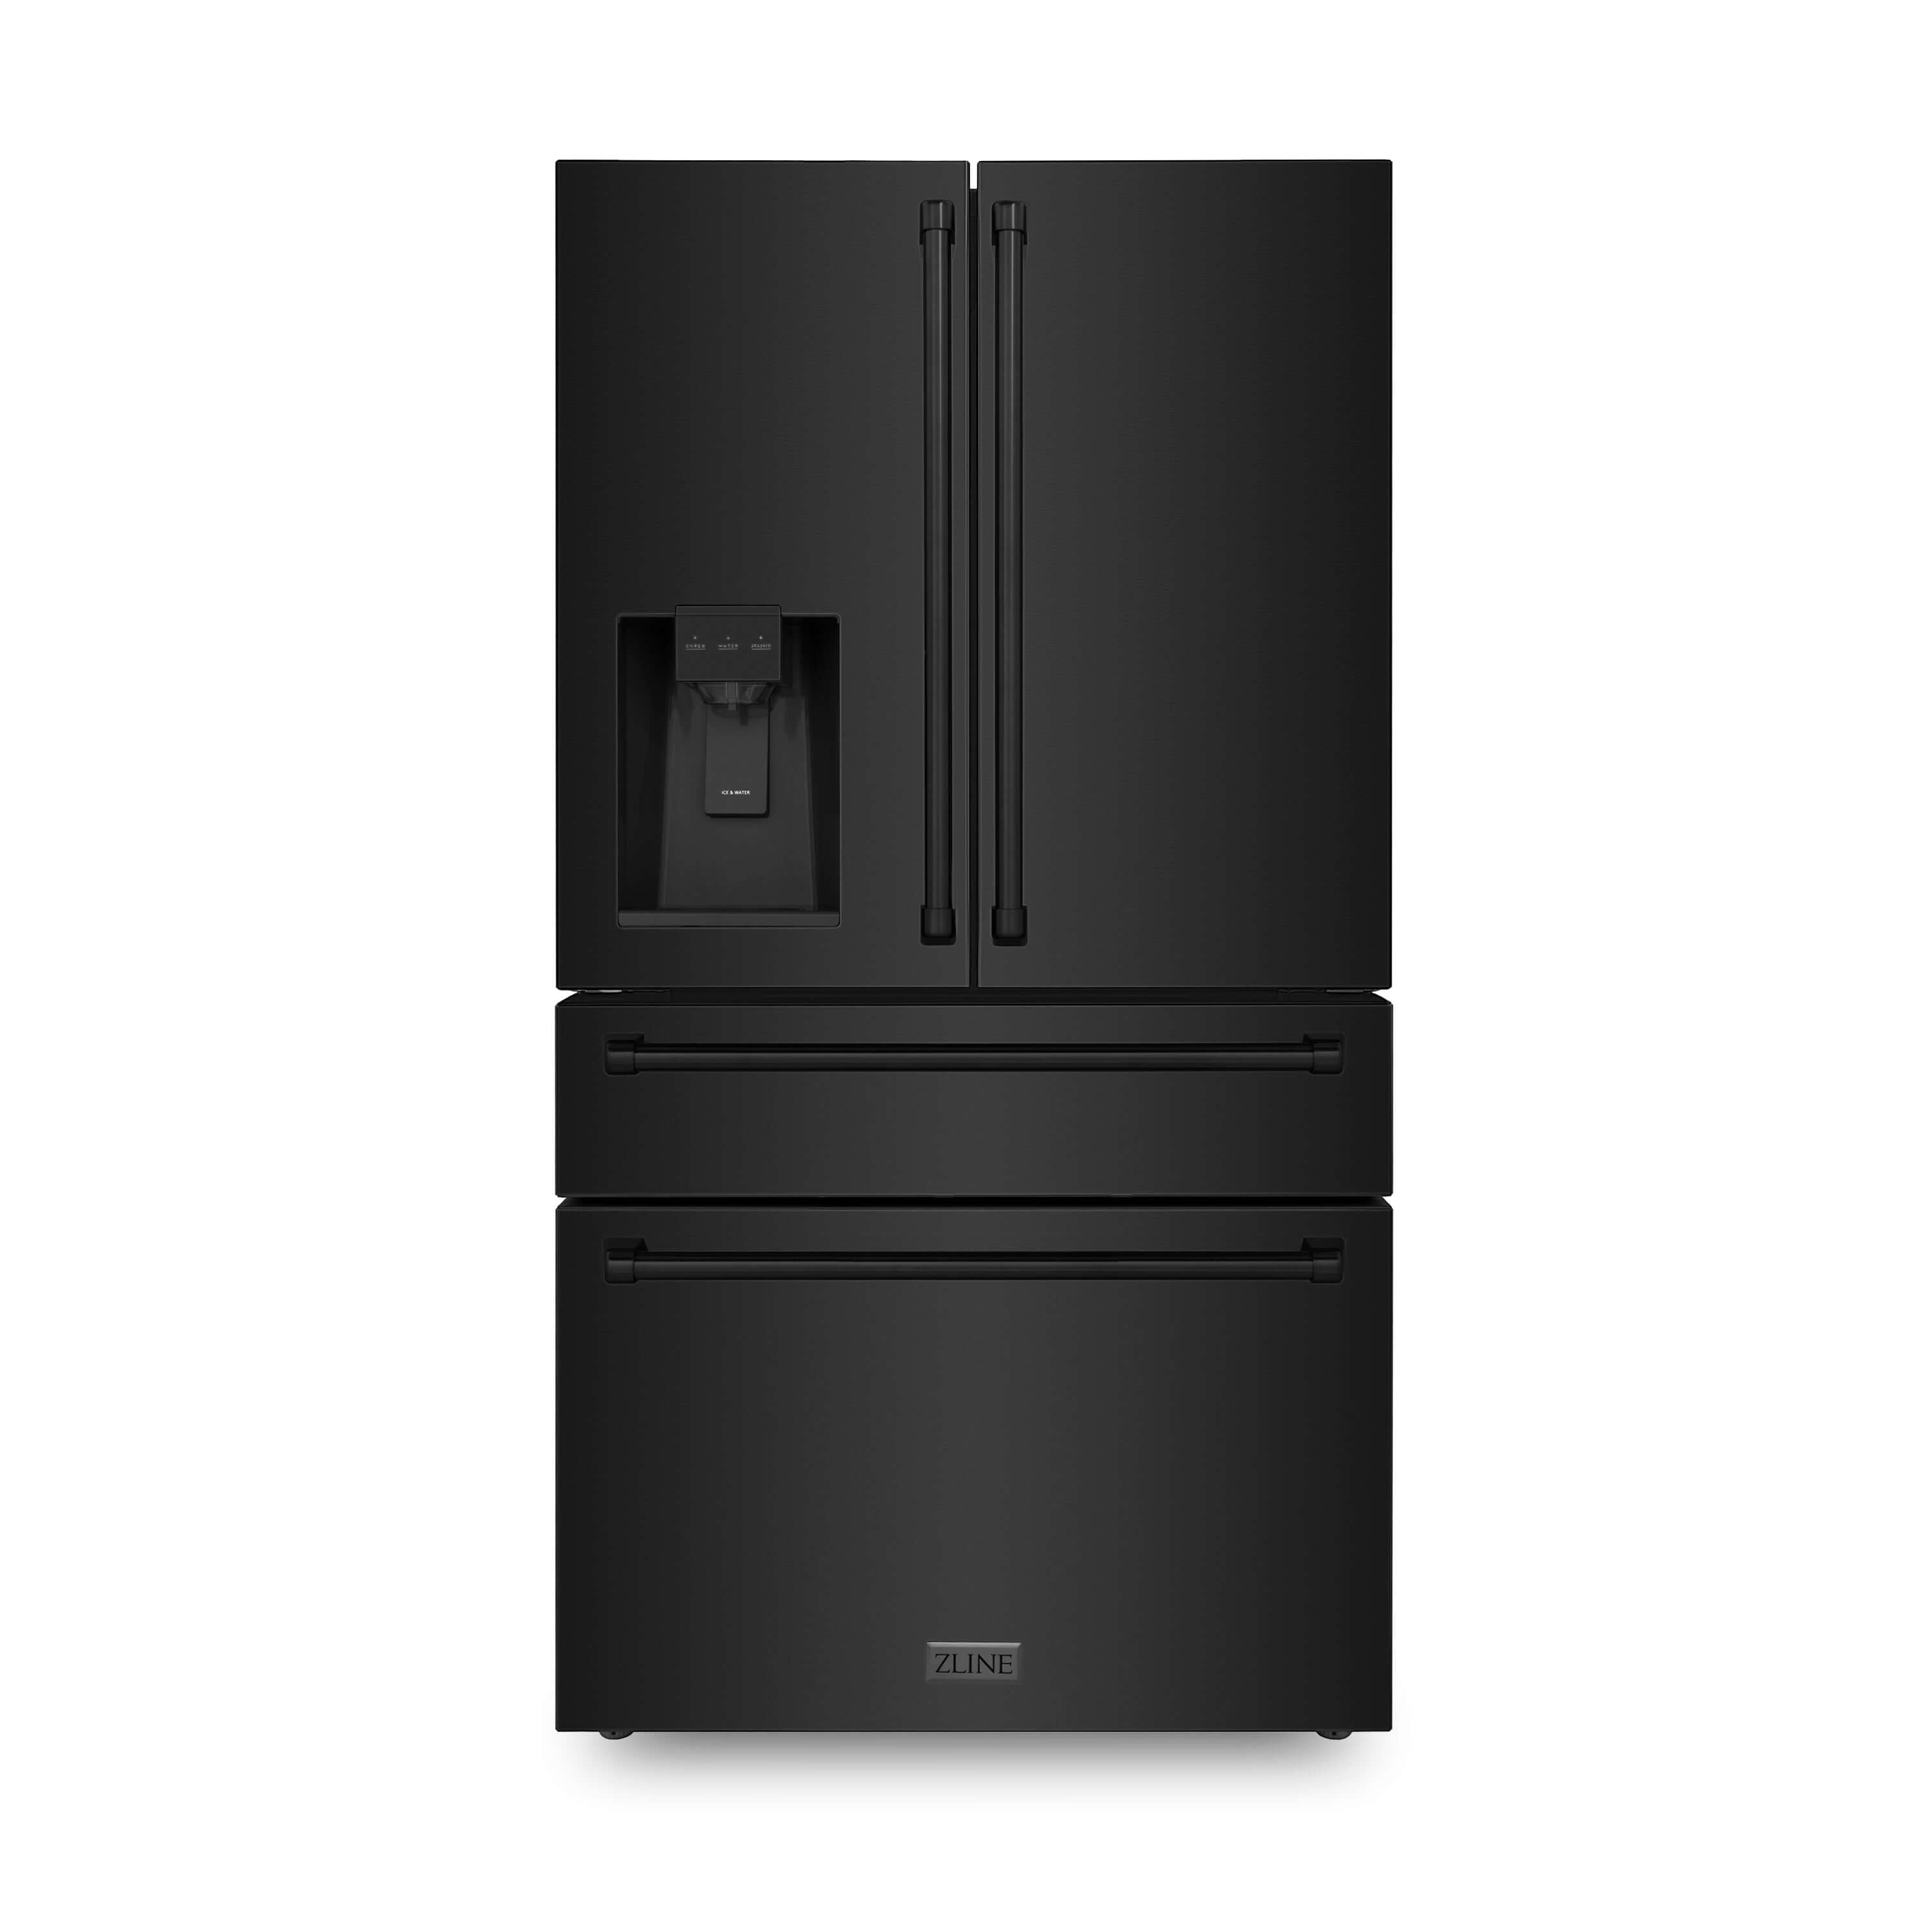 ZLINE 36 in. 21.6 cu. ft Freestanding French Door Fingerprint Resistant Refrigerator with External Water and Ice Dispenser in Black Stainless Steel (RFM-W-36-BS) front, closed.